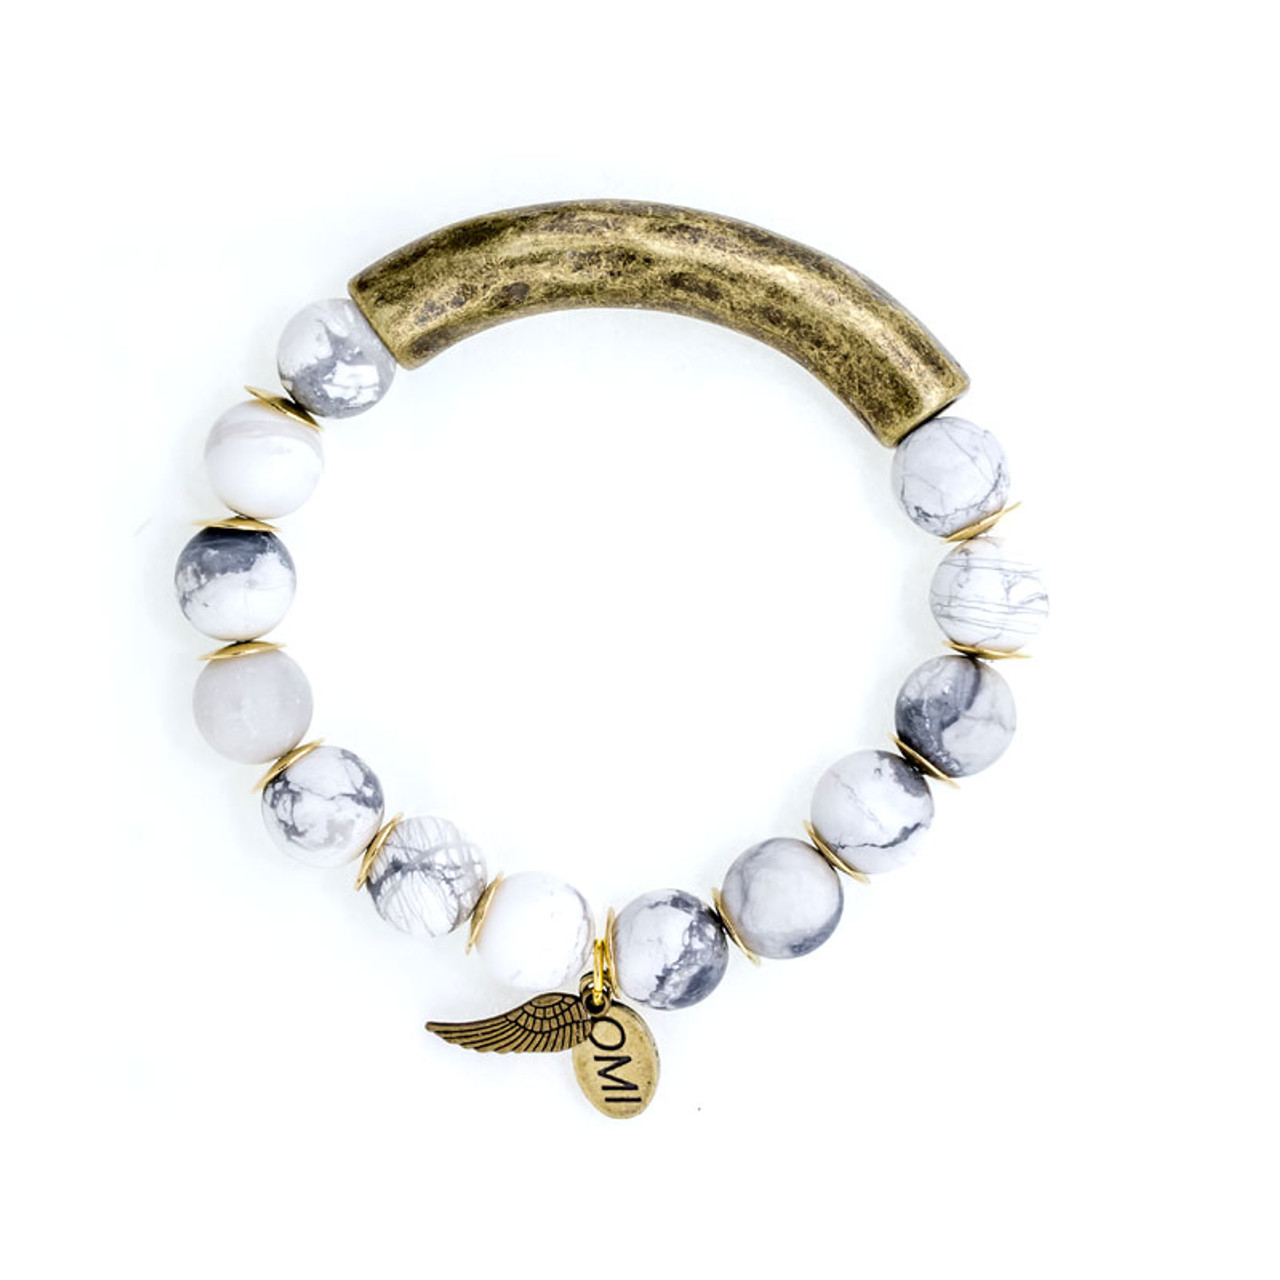 White Marble Howlite Stone Bead Bracelet with Bronze Bar and Spacers - 10mm